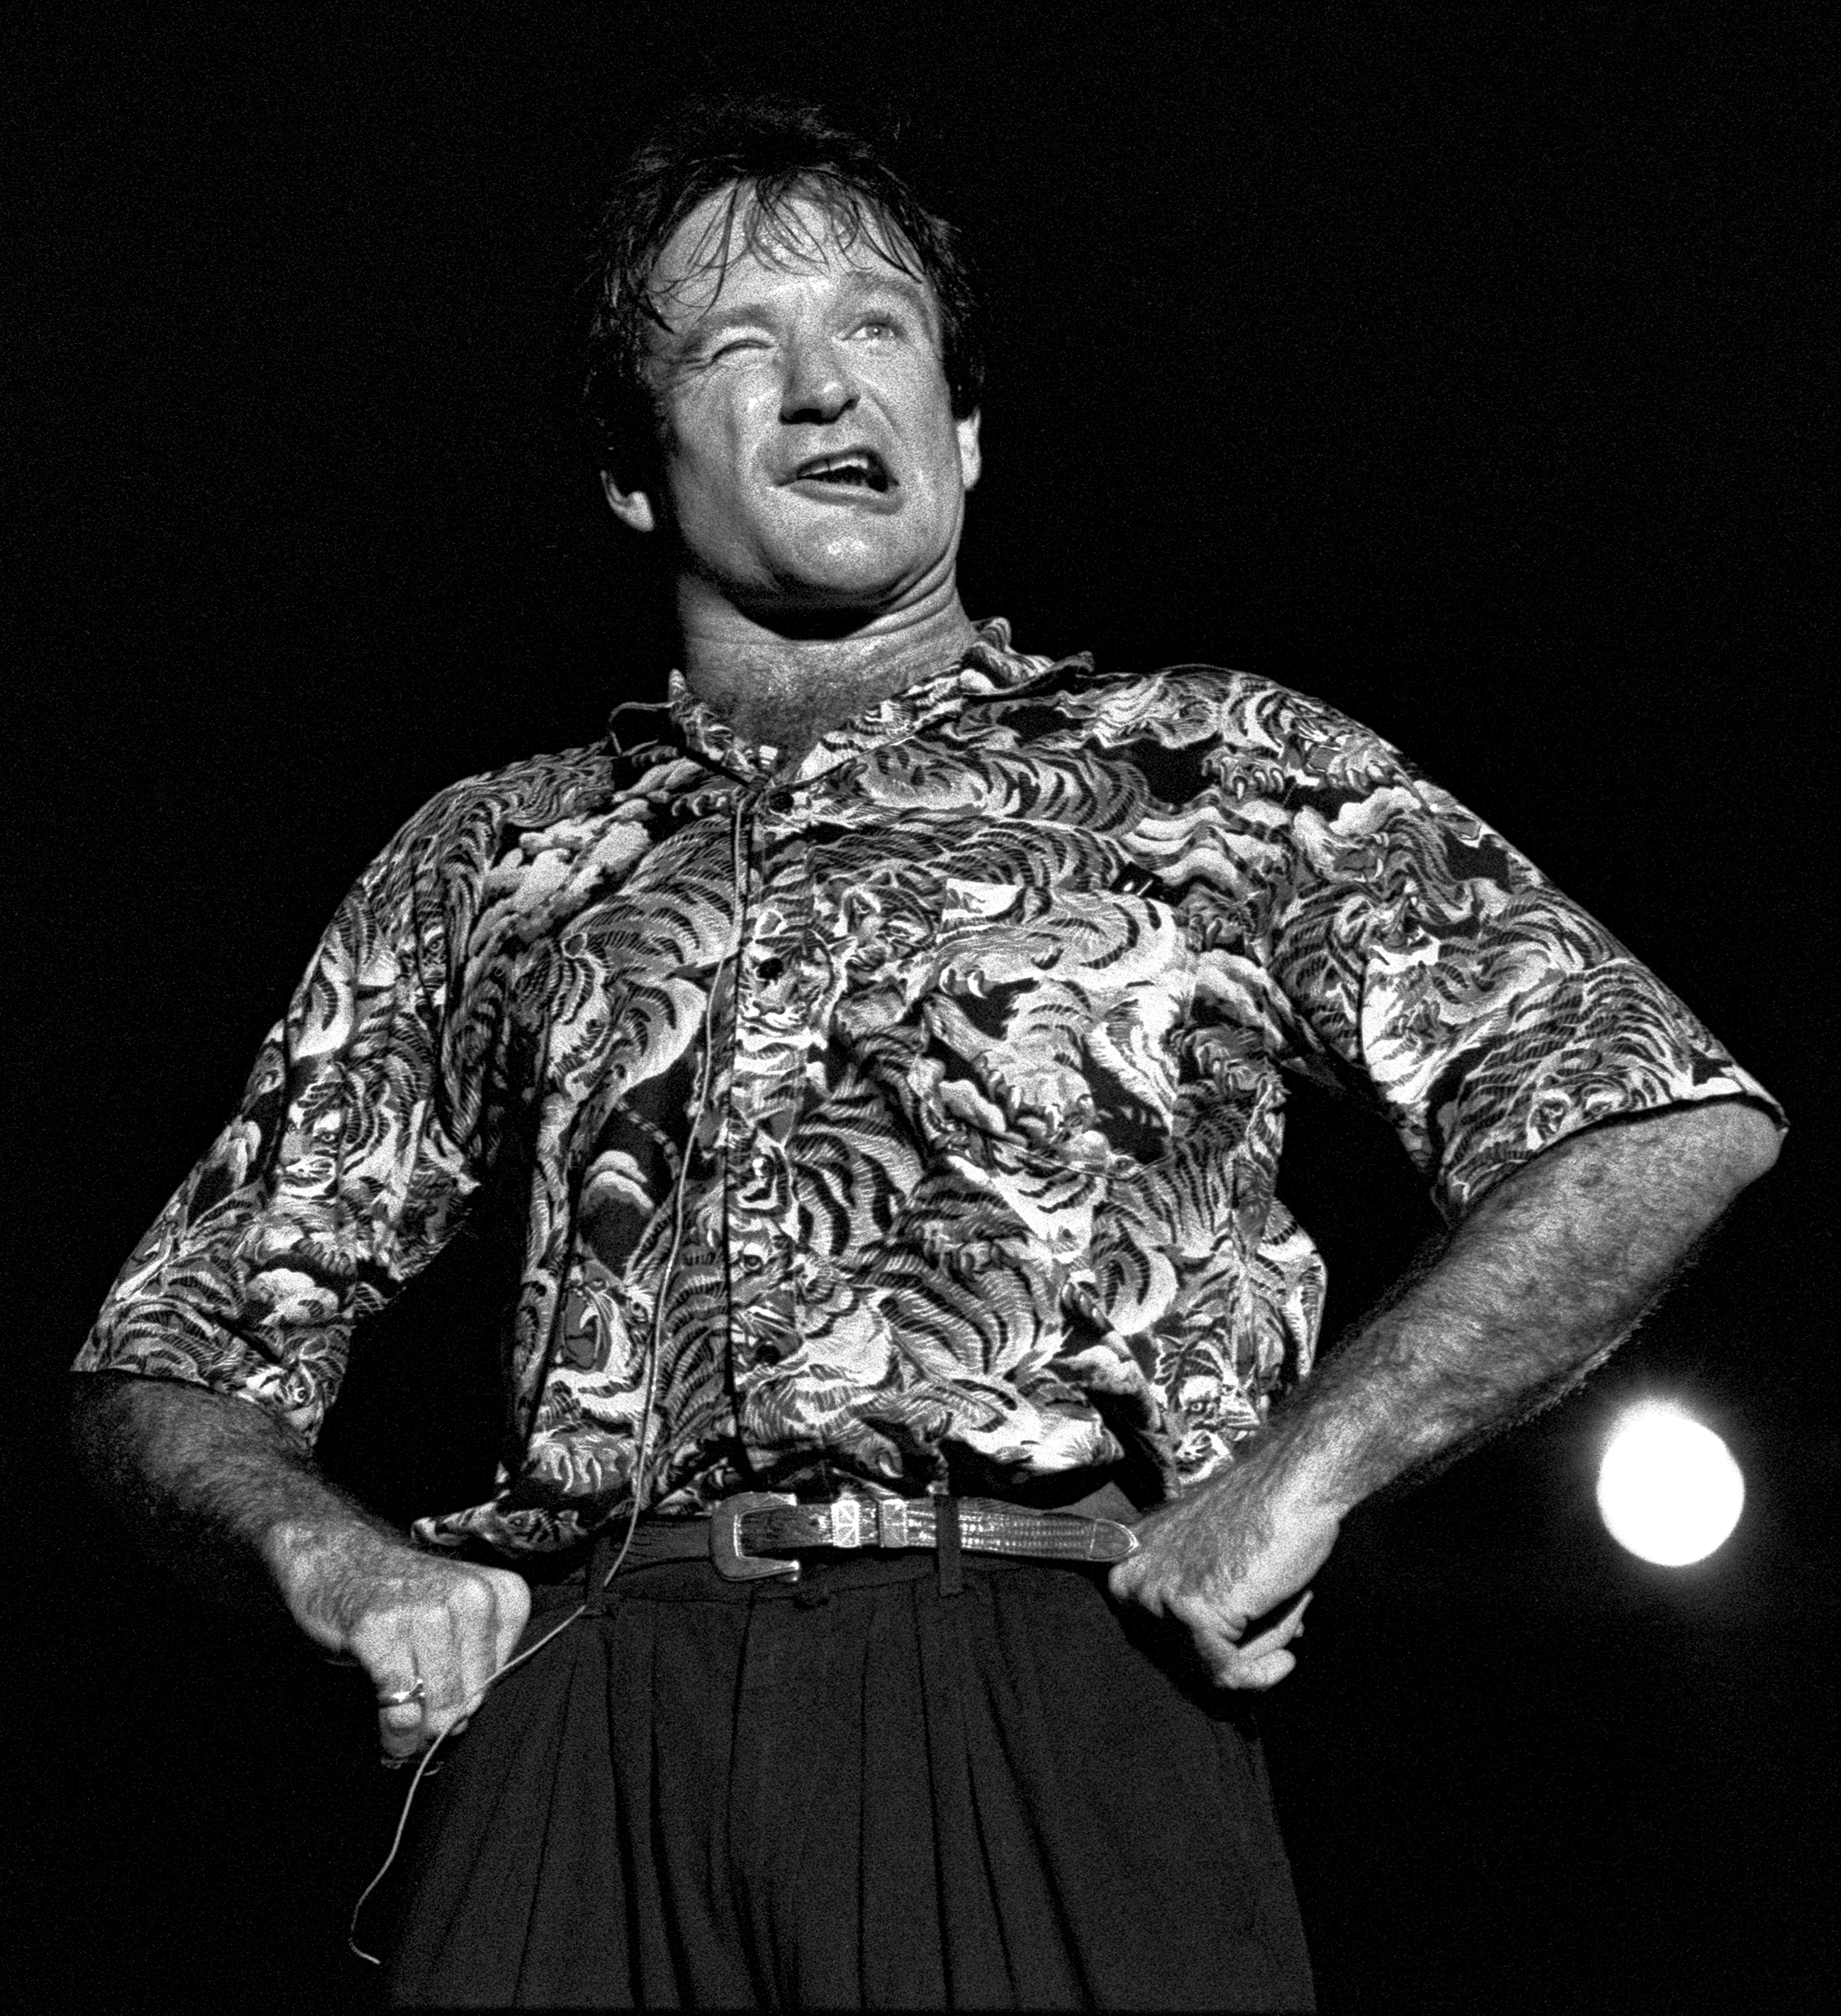 Robin Williams at Chastain Park Amphitheater in Atlanta Georgia, 1986. | Source: Getty Images